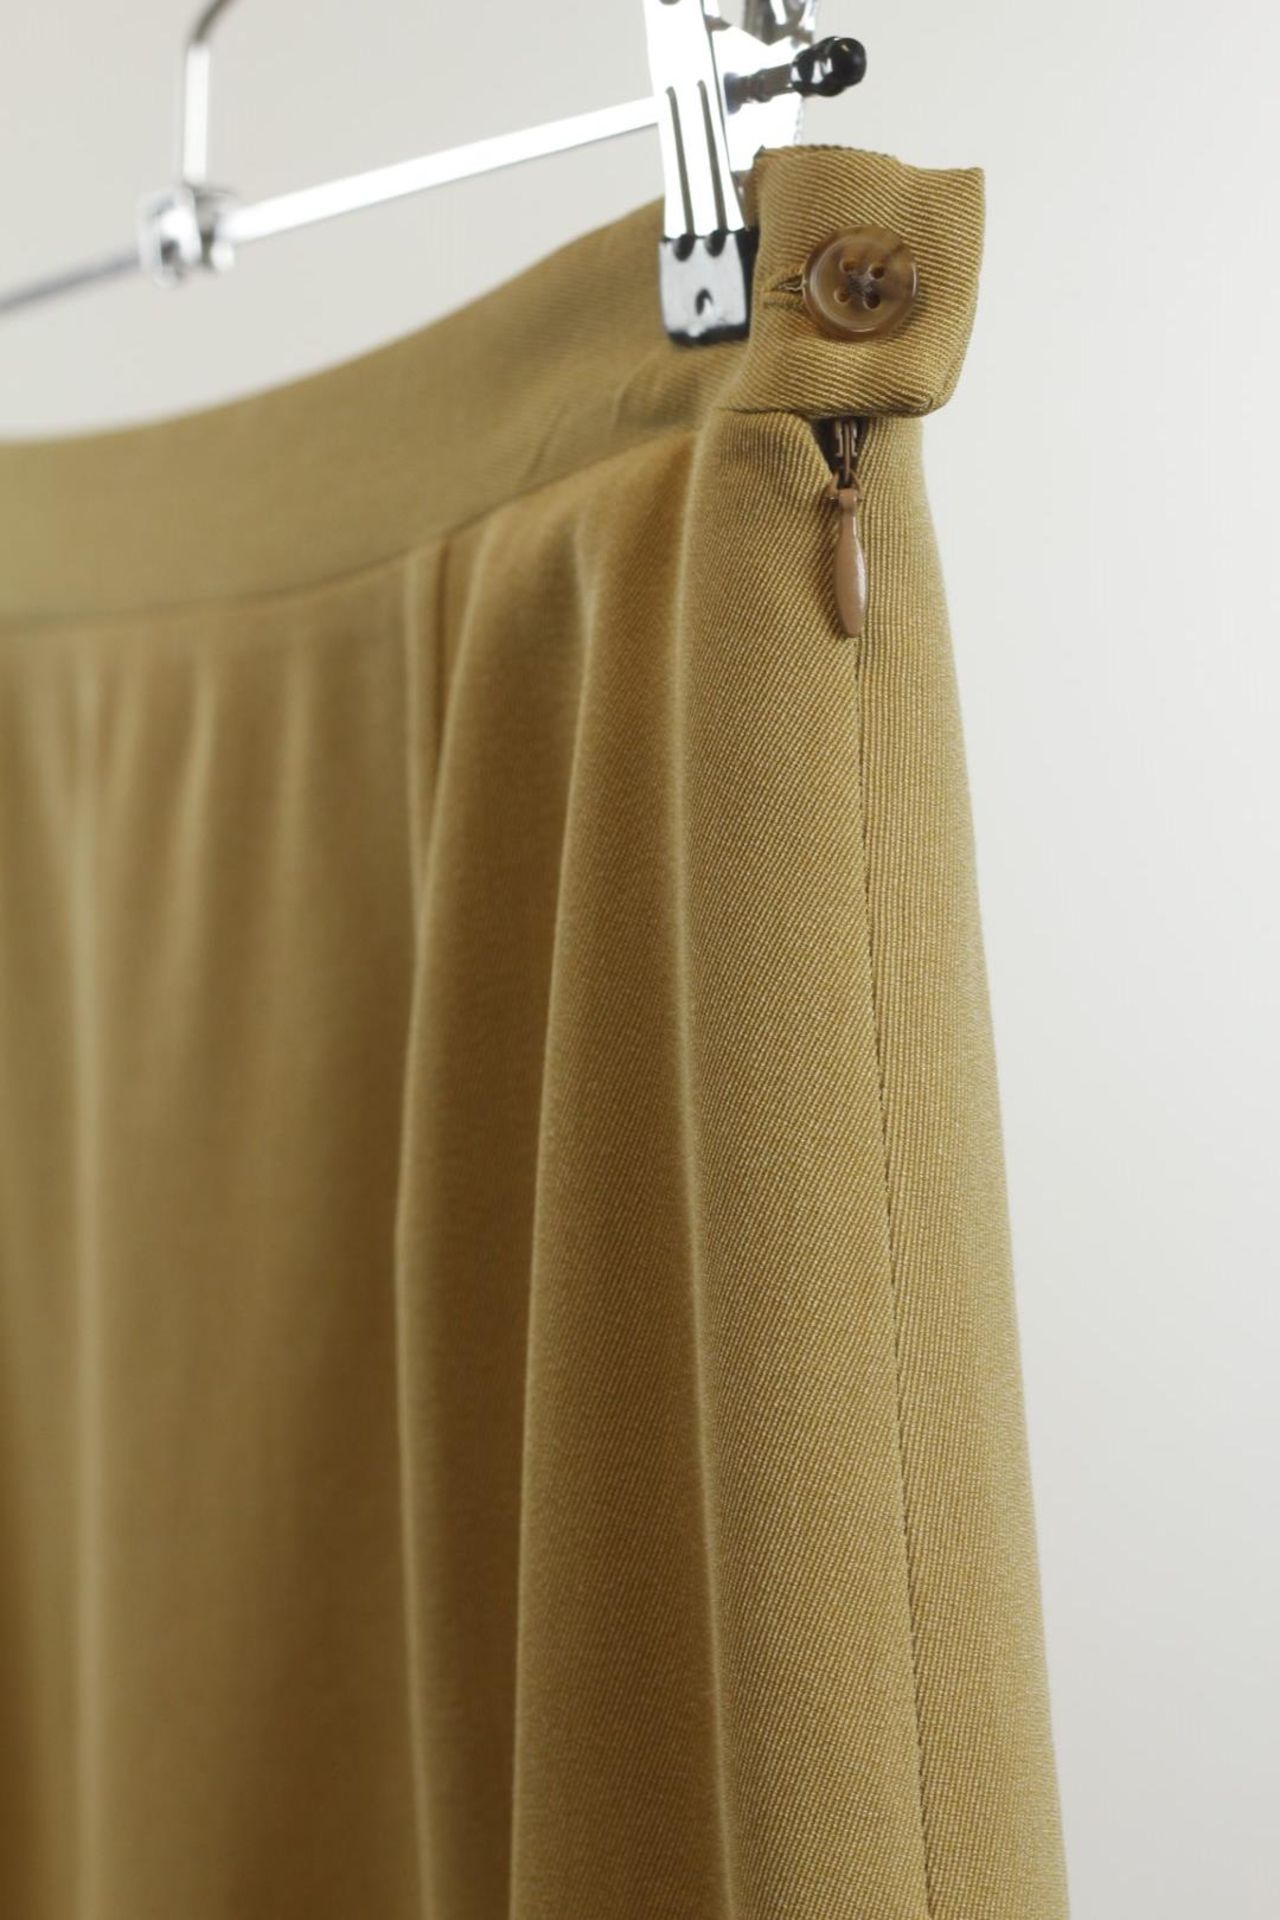 1 x Belvest Mustard Skirt - Size: 18 - Material: 75% Wool 25% Cotton. Lining 100% Rayon - From a - Image 5 of 7